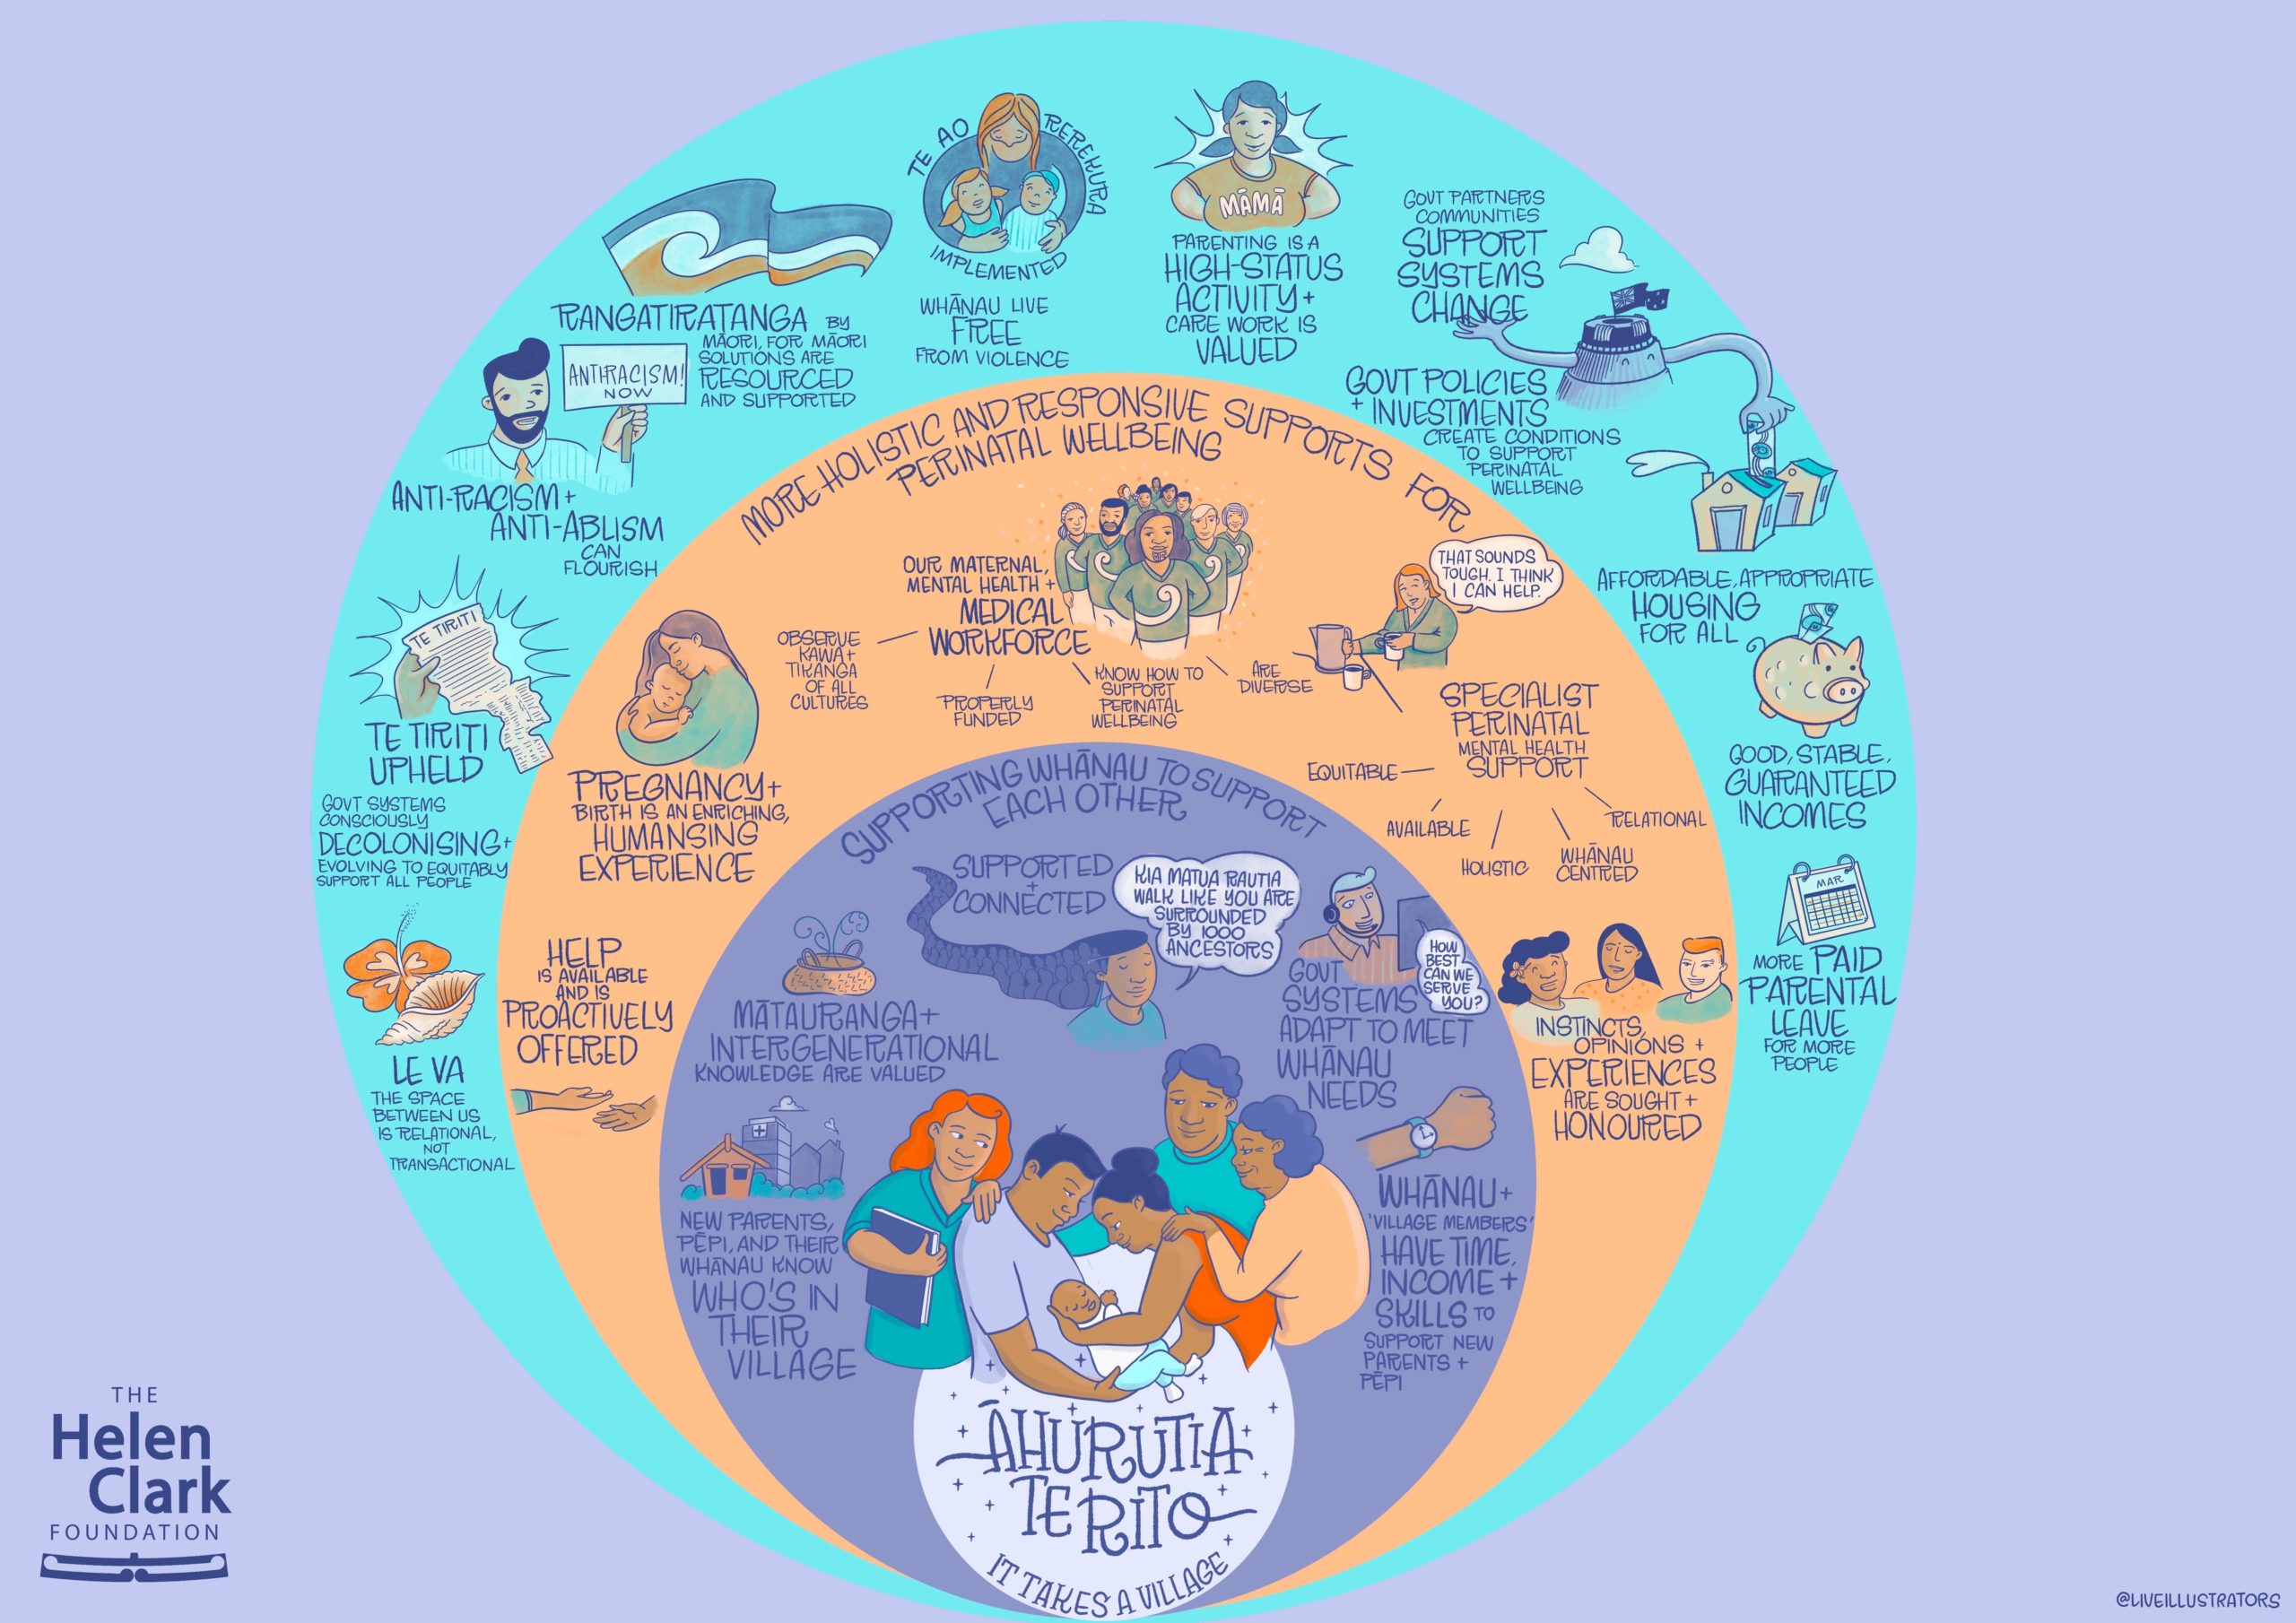 Āhurutia Te Rito It takes a village illustration of outcomes summary diagram including concentric circles with mothers in the centre, then family/whānau supports, direct social supports, and the outer circle consisting of broad social supports and changes